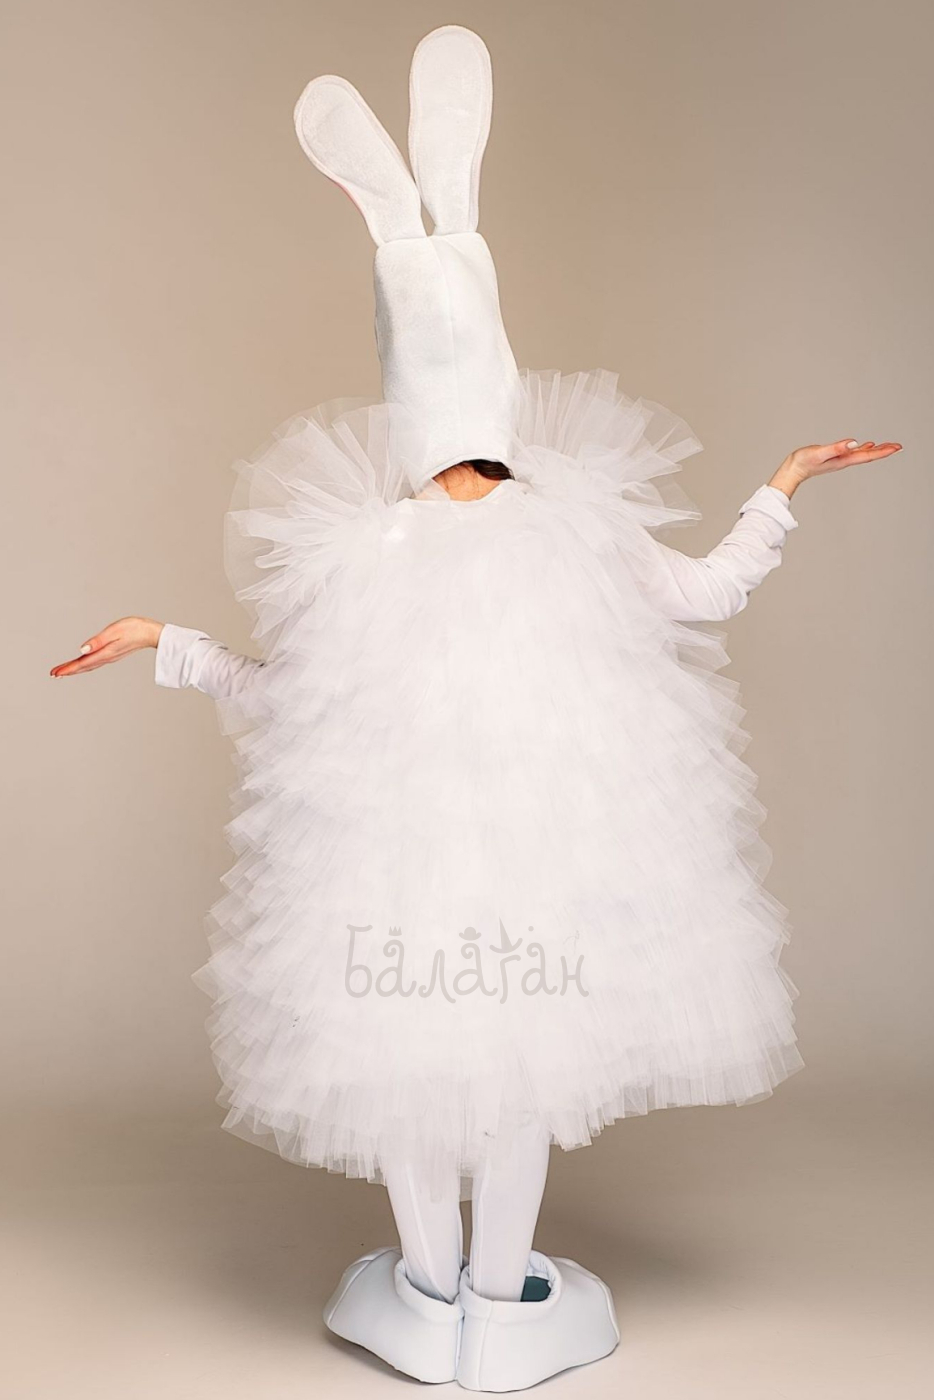  Easter Bunny Costume